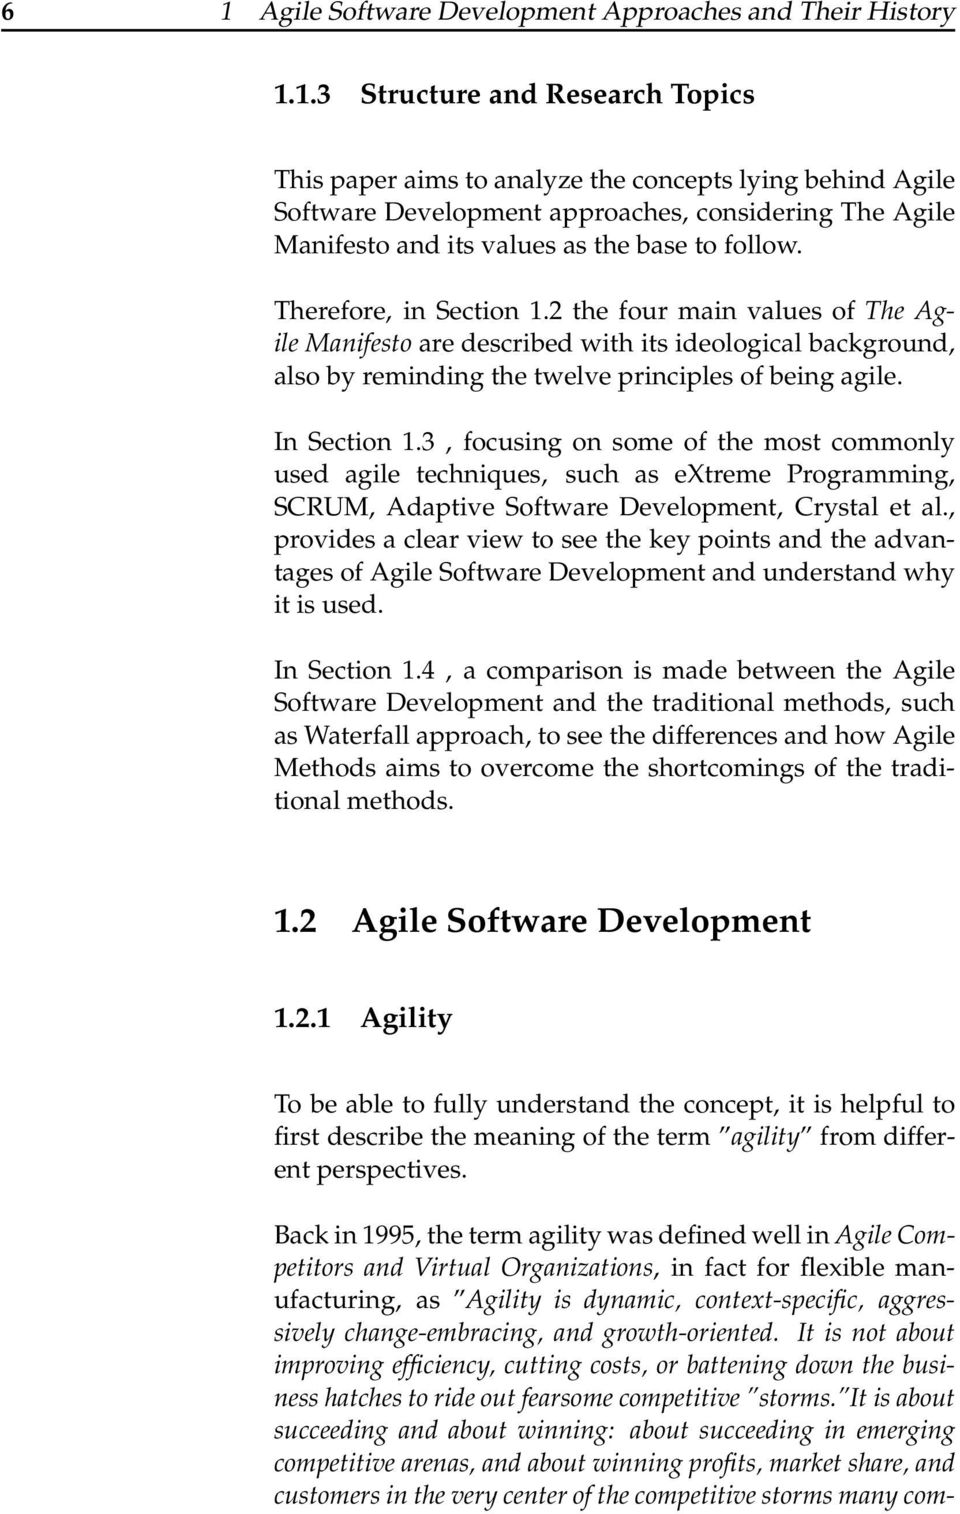 3, focusing on some of the most commonly used agile techniques, such as extreme Programming, SCRUM, Adaptive Software Development, Crystal et al.